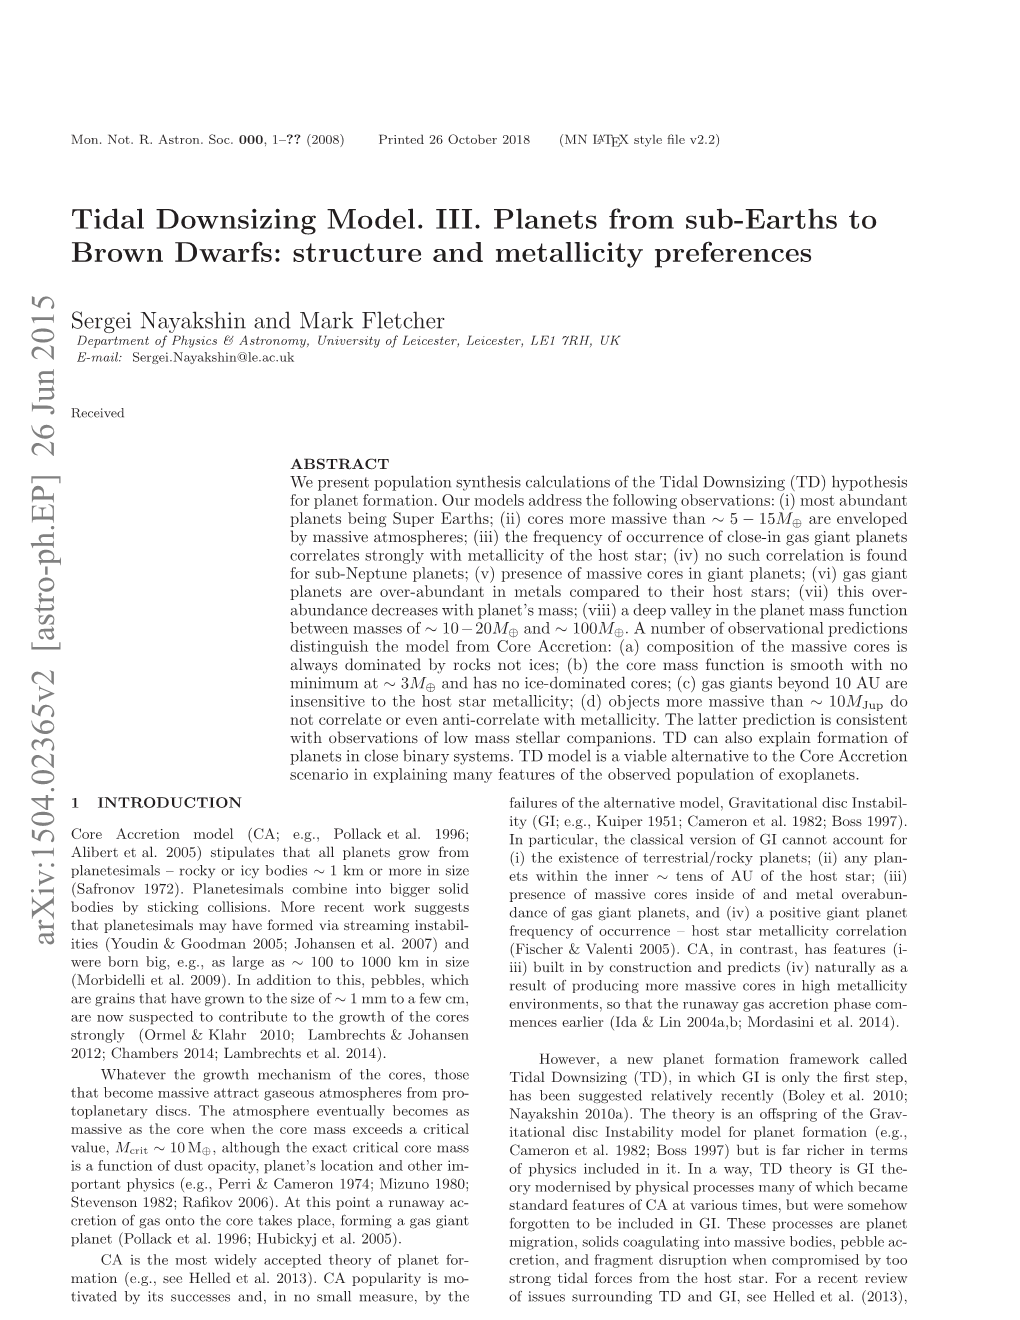 Tidal Downsizing Model. III. Planets from Sub-Earths to Brown Dwarfs